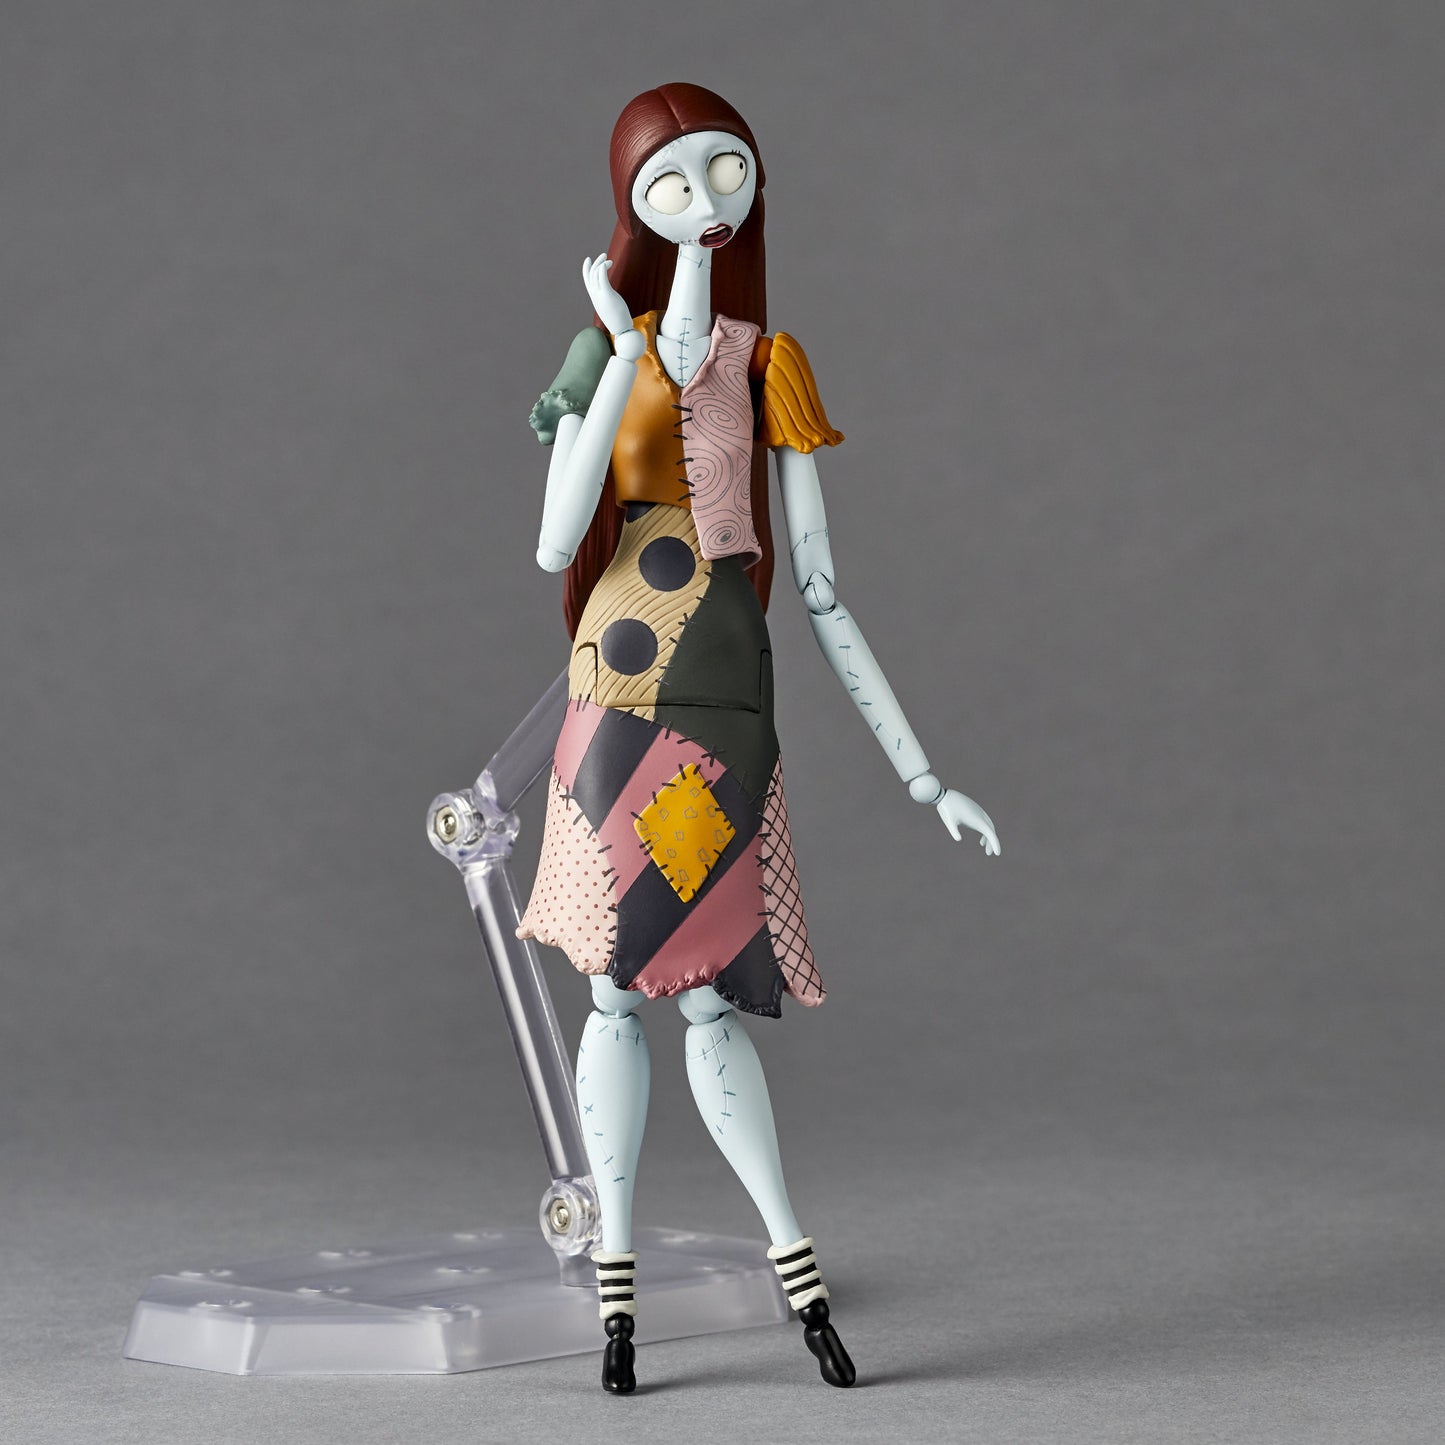 Revoltech "The Nightmare Before Christmas" Sally